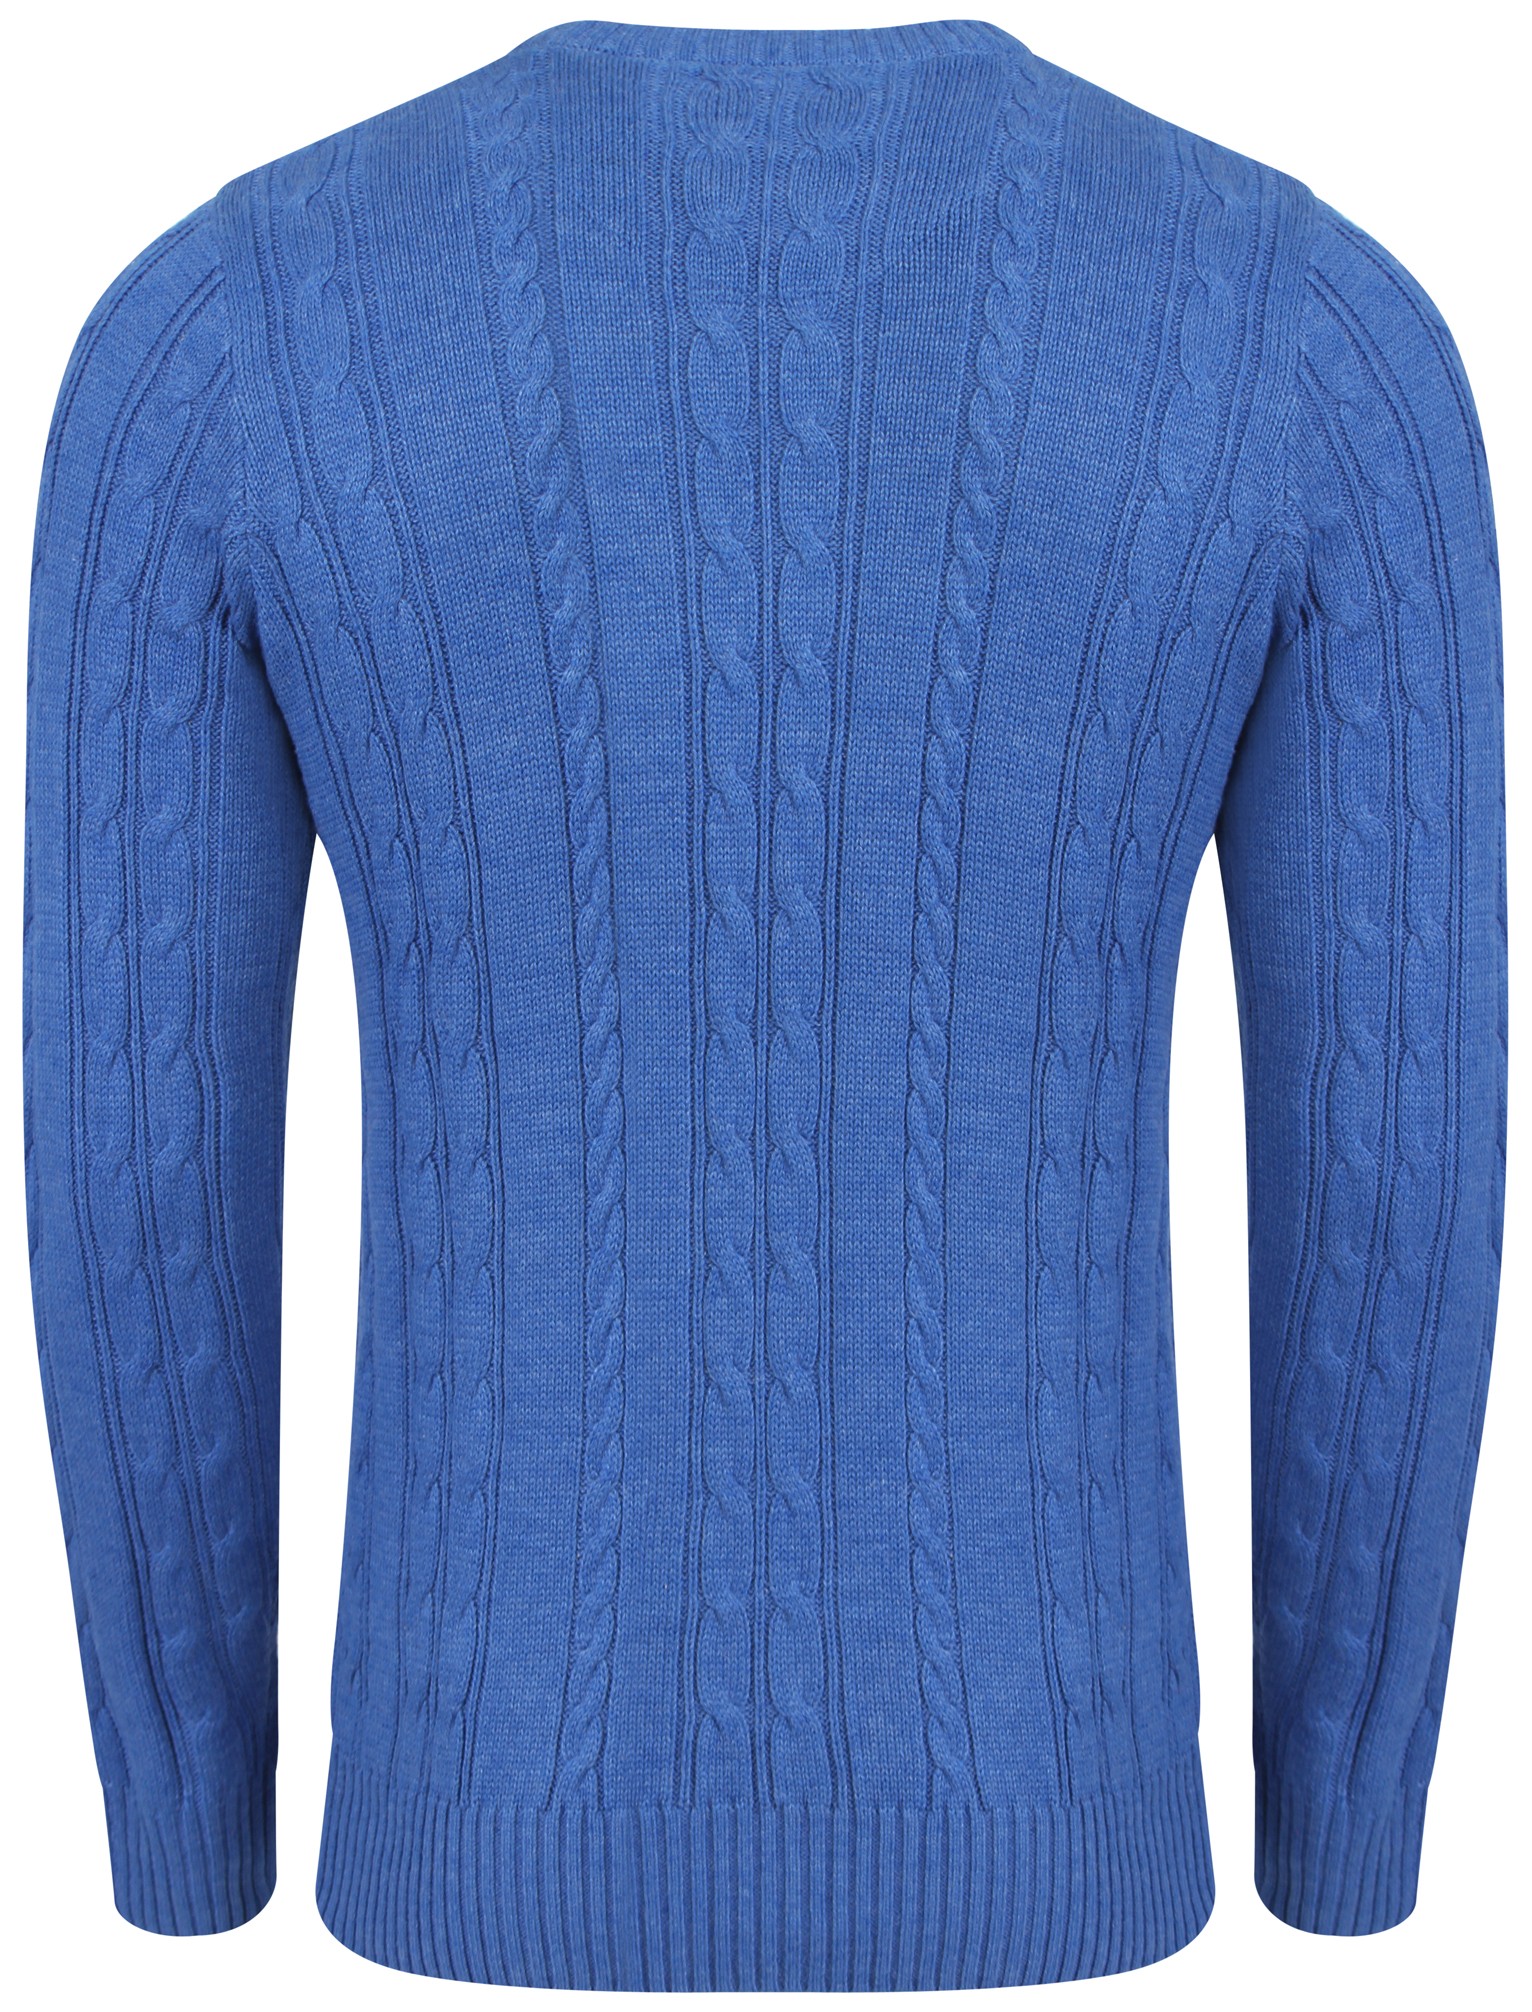 Mens Old Boys Network Jerome Cable Knit Jumper Long Sleeve Sweater Size ...